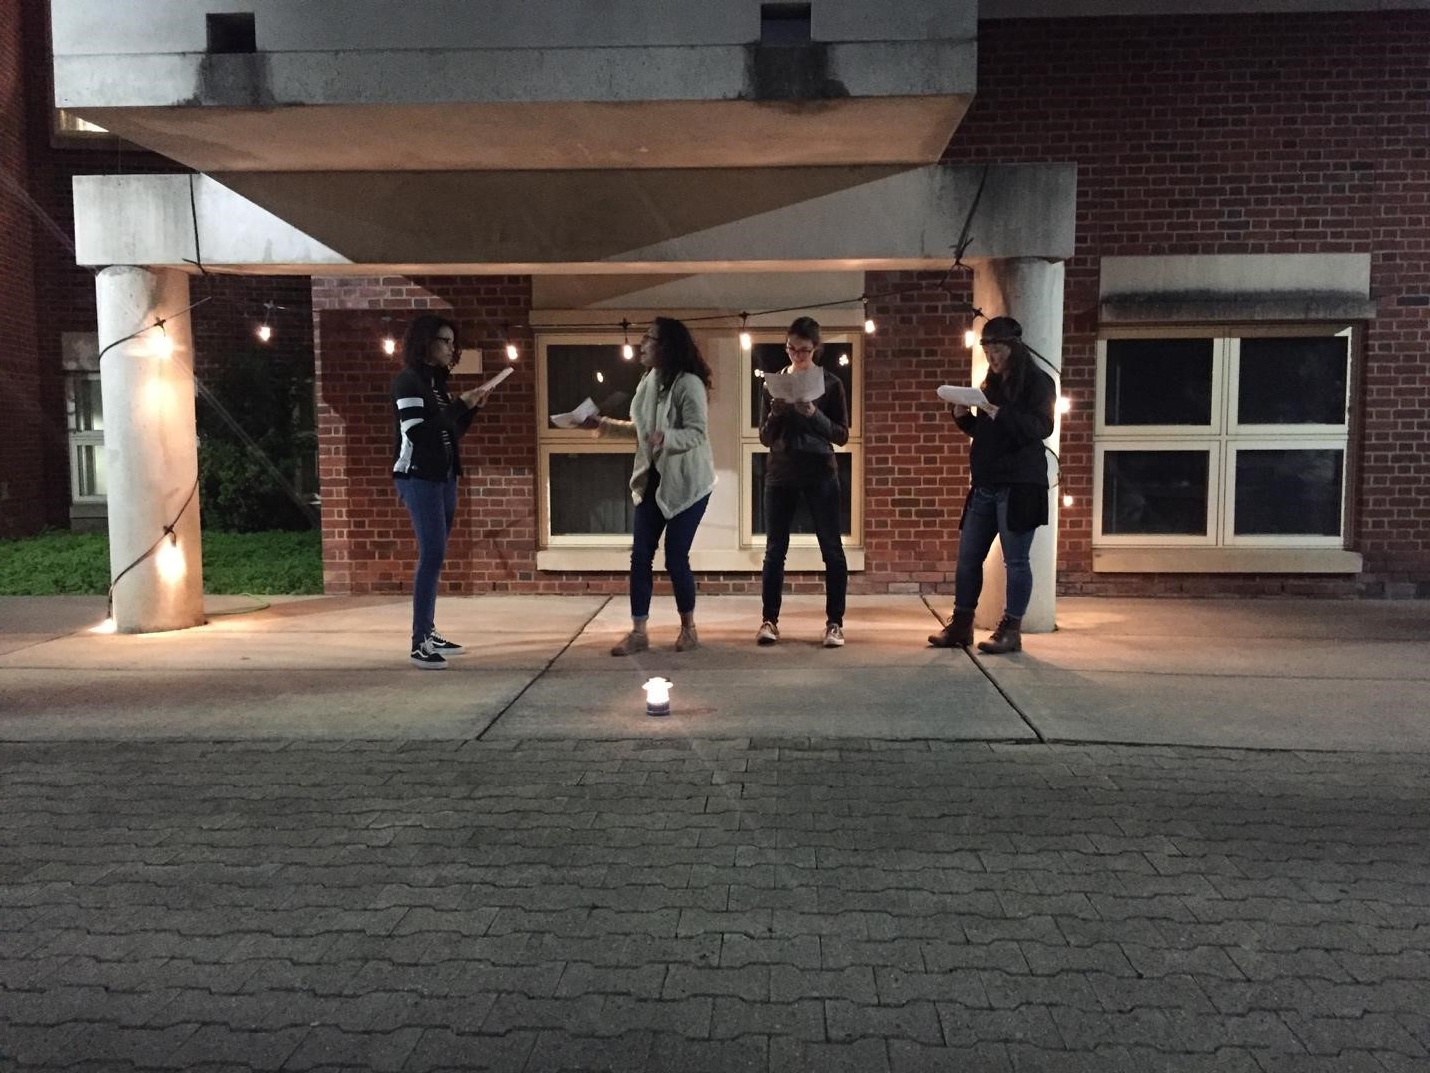 From Left Nicauly casilla, Sharon Becerra Pachon, Erin Maud, and Macie Shum performing “Sígame contando”, comedy in one act written by Nadine Dixon.